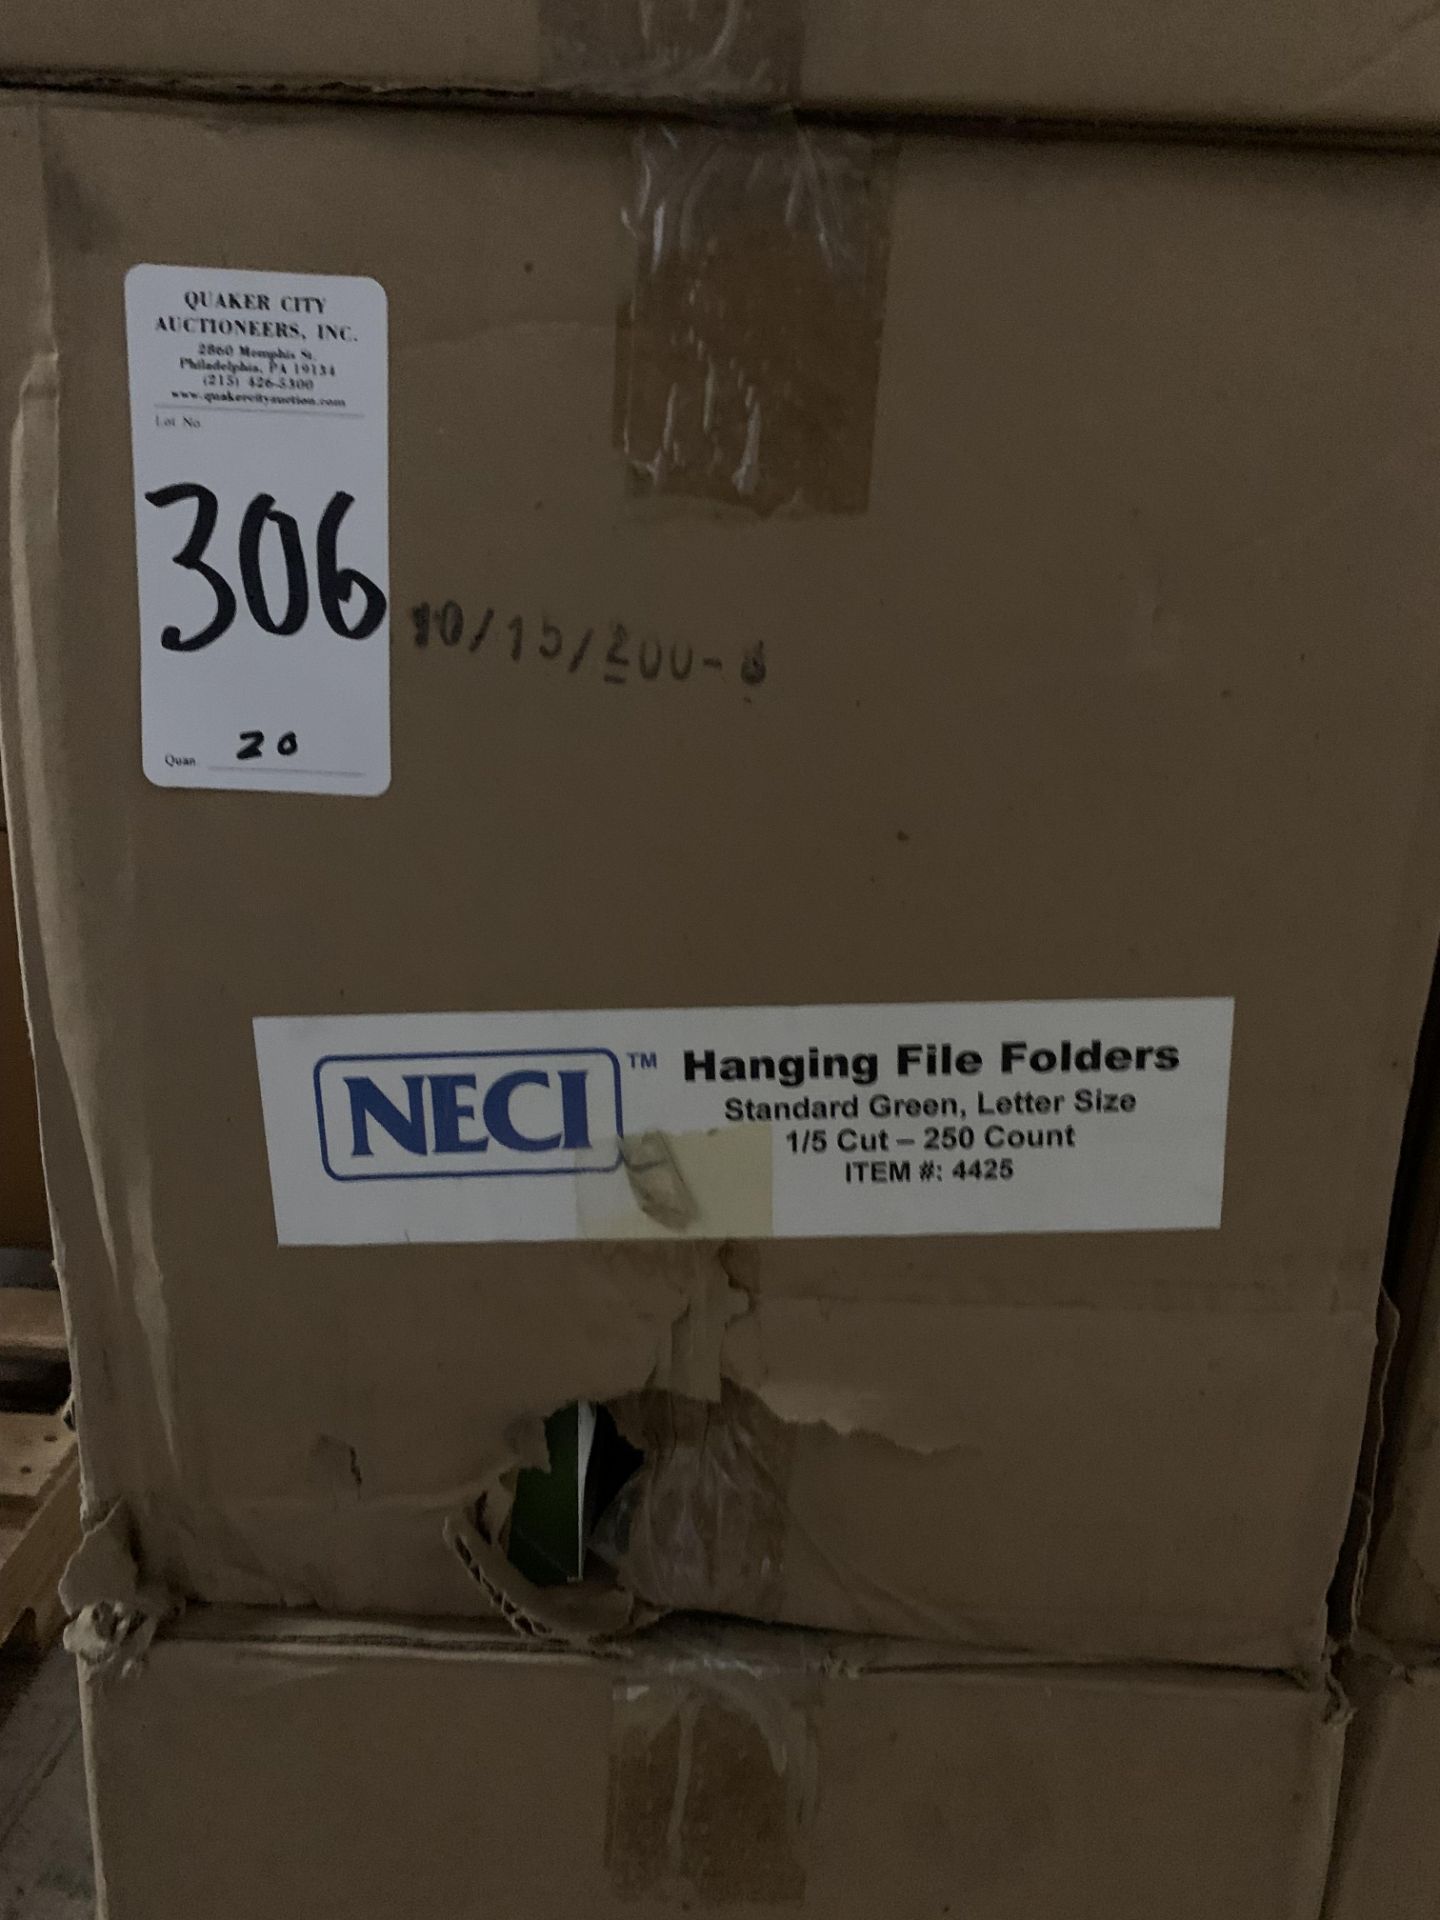 (20 BOXES) OF NECI 4425 STANDARD GREEN LETTER SIZE 1/5 CUT HANGING FILE FOLDERS (25/PER BOX) - Image 2 of 2